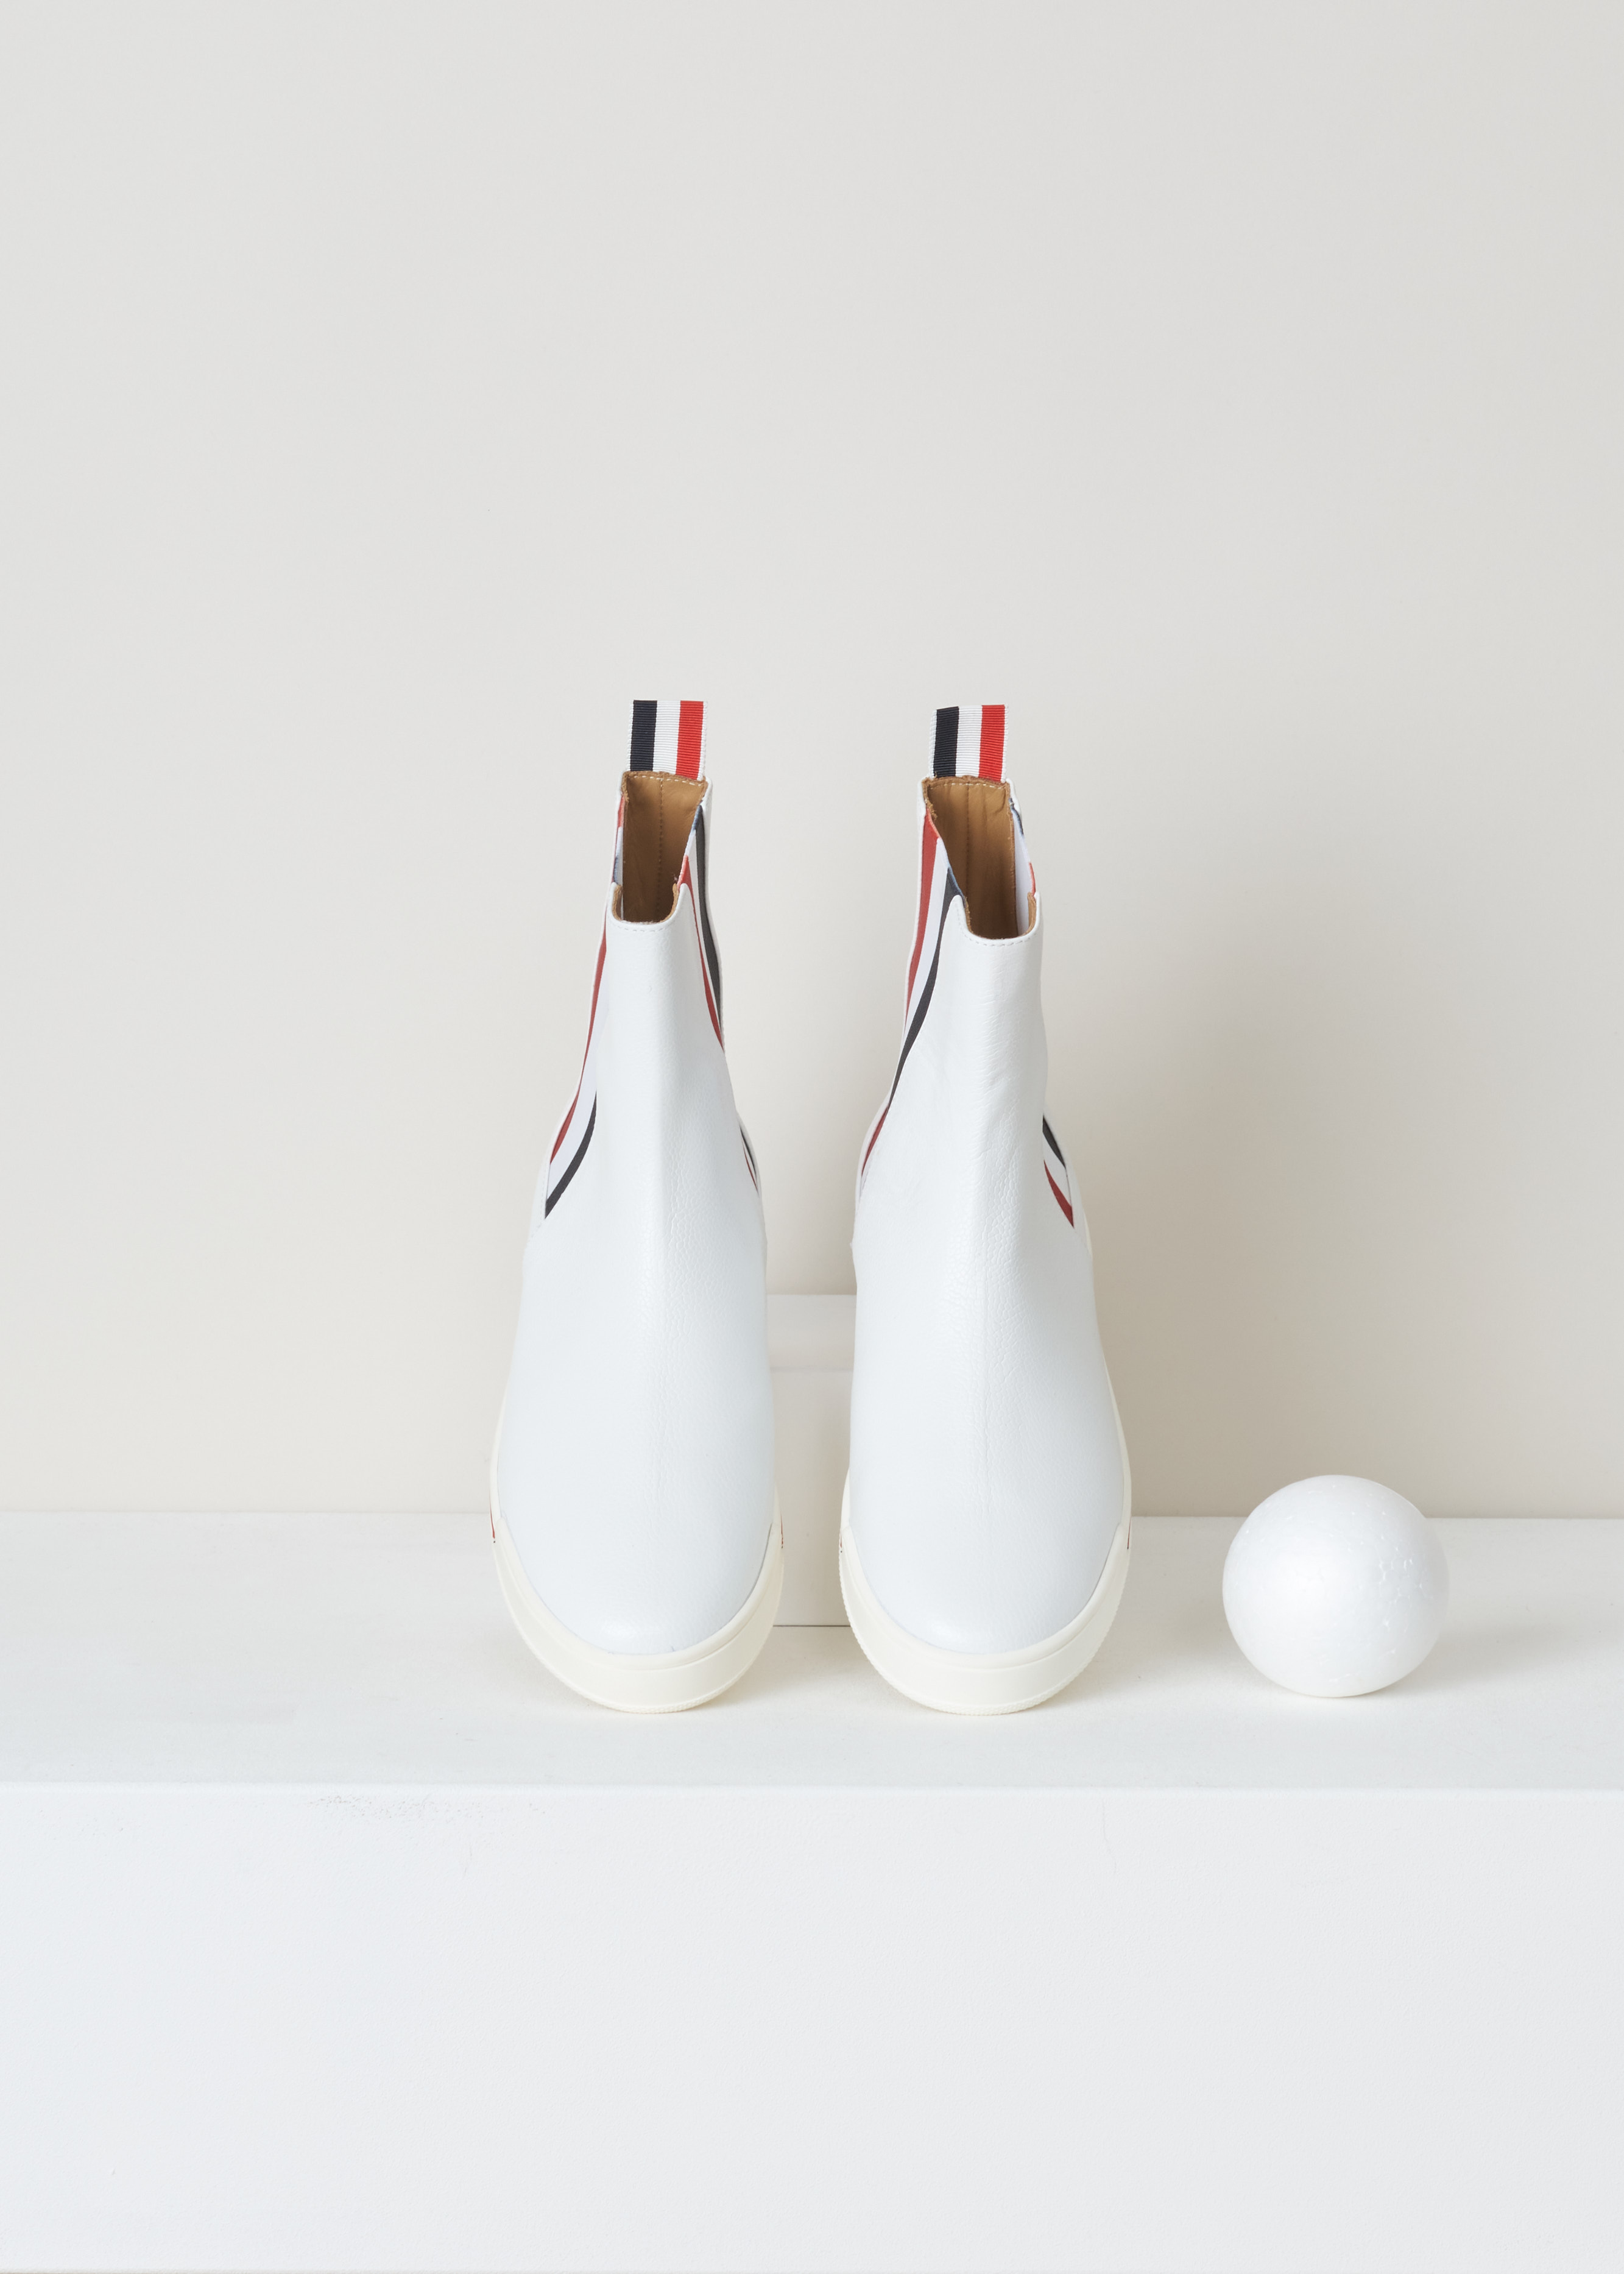 Thom Browne Chelsea boot sneaker white FFB056B_03542_100 white top. White leather chelsea boot with red and blue striped elastic side panels, a rounded toe, a pull tab at the back and a white rubber sole with red and blue detailing. 